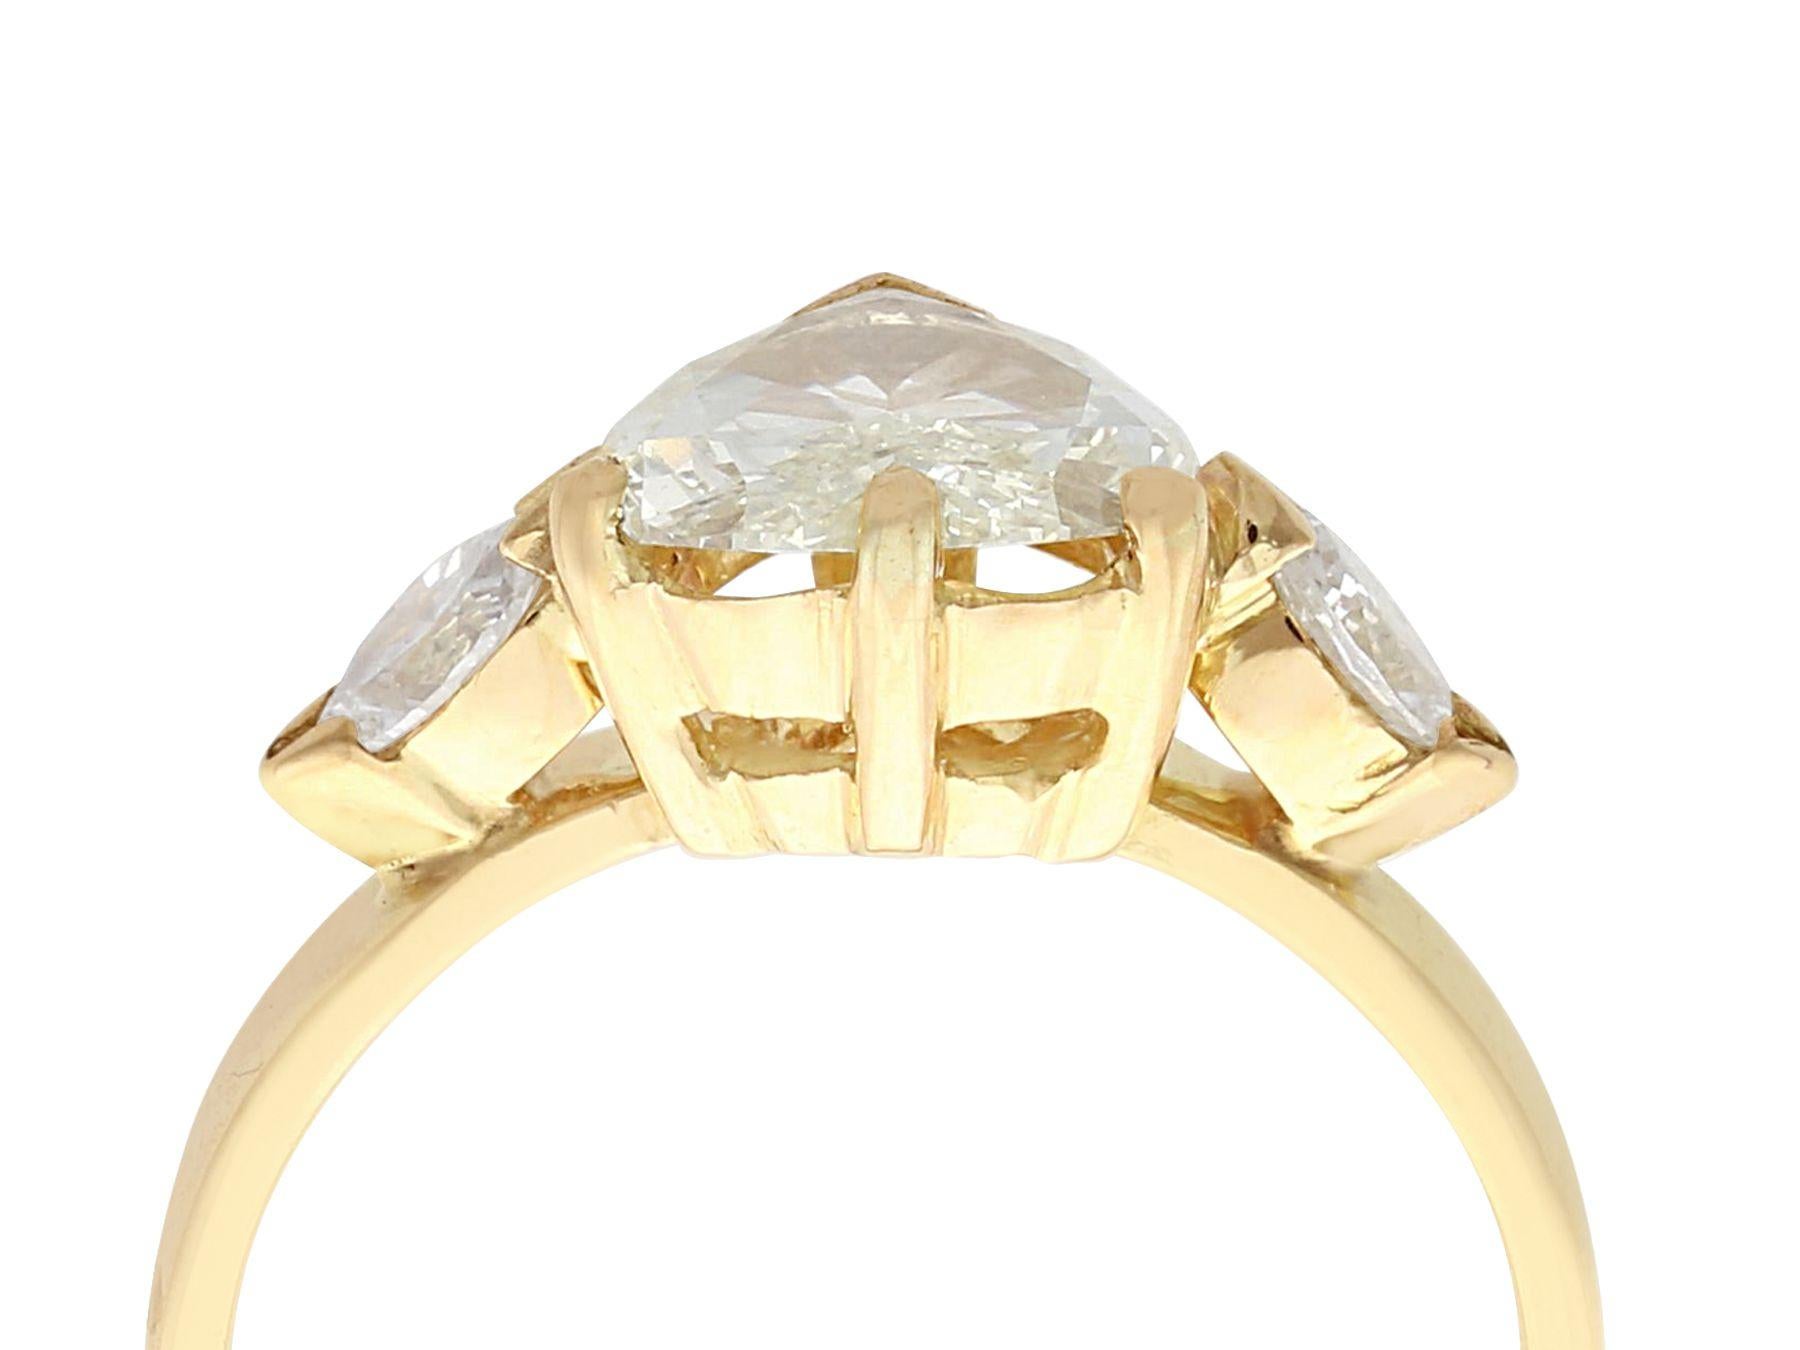 An impressive vintage 1990s French 1.32 carat diamond and 18 karat yellow gold engagement ring; part of our diverse gemstone jewelry and estate jewelry collections.

This fine and impressive vintage heart cut diamond ring has been crafted in 18k